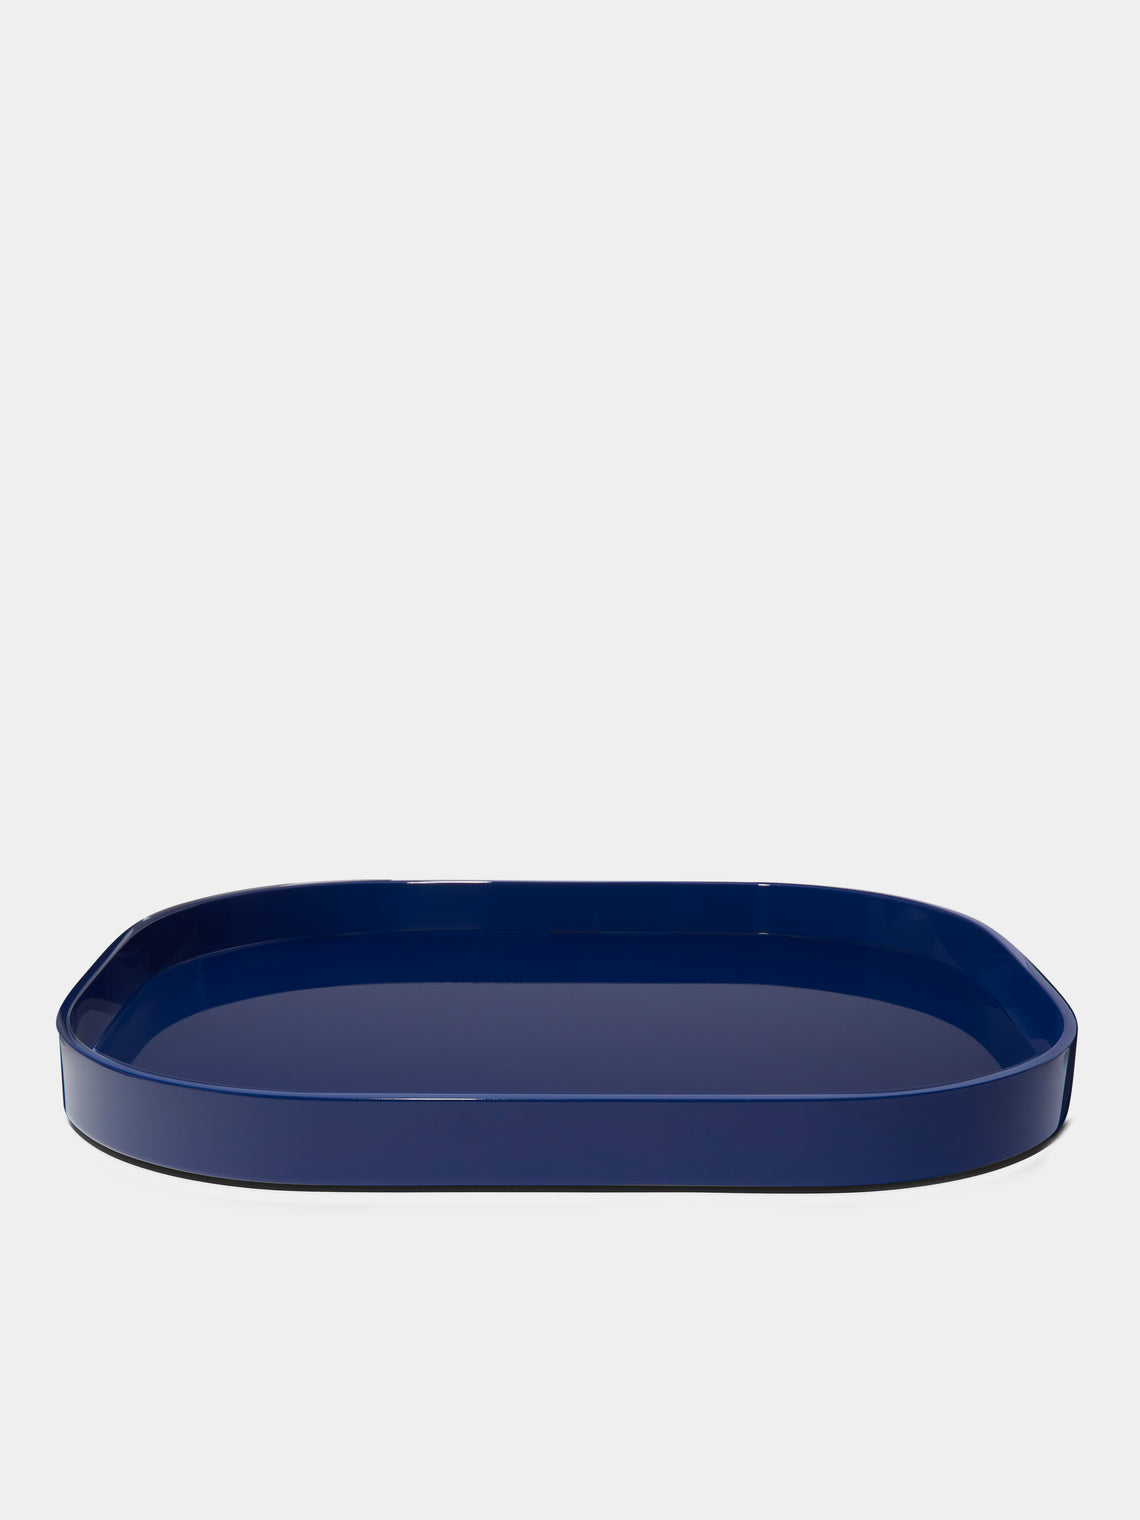 The Lacquer Company - Lacquered Large Stacking Tray - Blue - ABASK